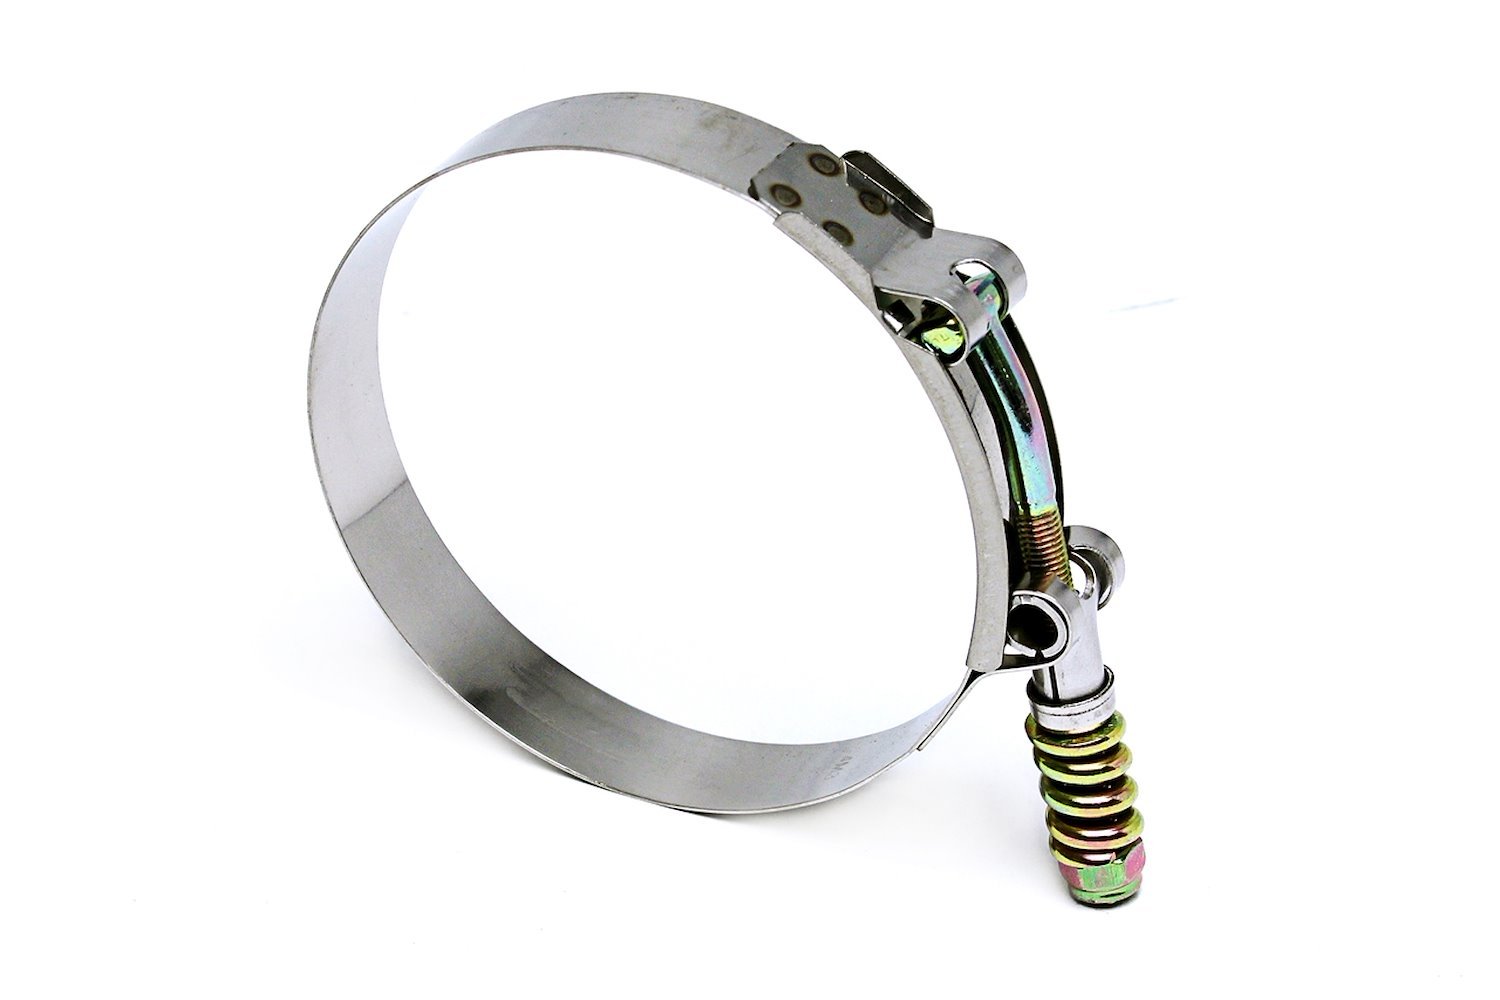 SLTC-212 Stainless Steel Spring Loaded T-Bolt Hose Clamp, Size #40, Range: 2.13 in.-2.44 in.